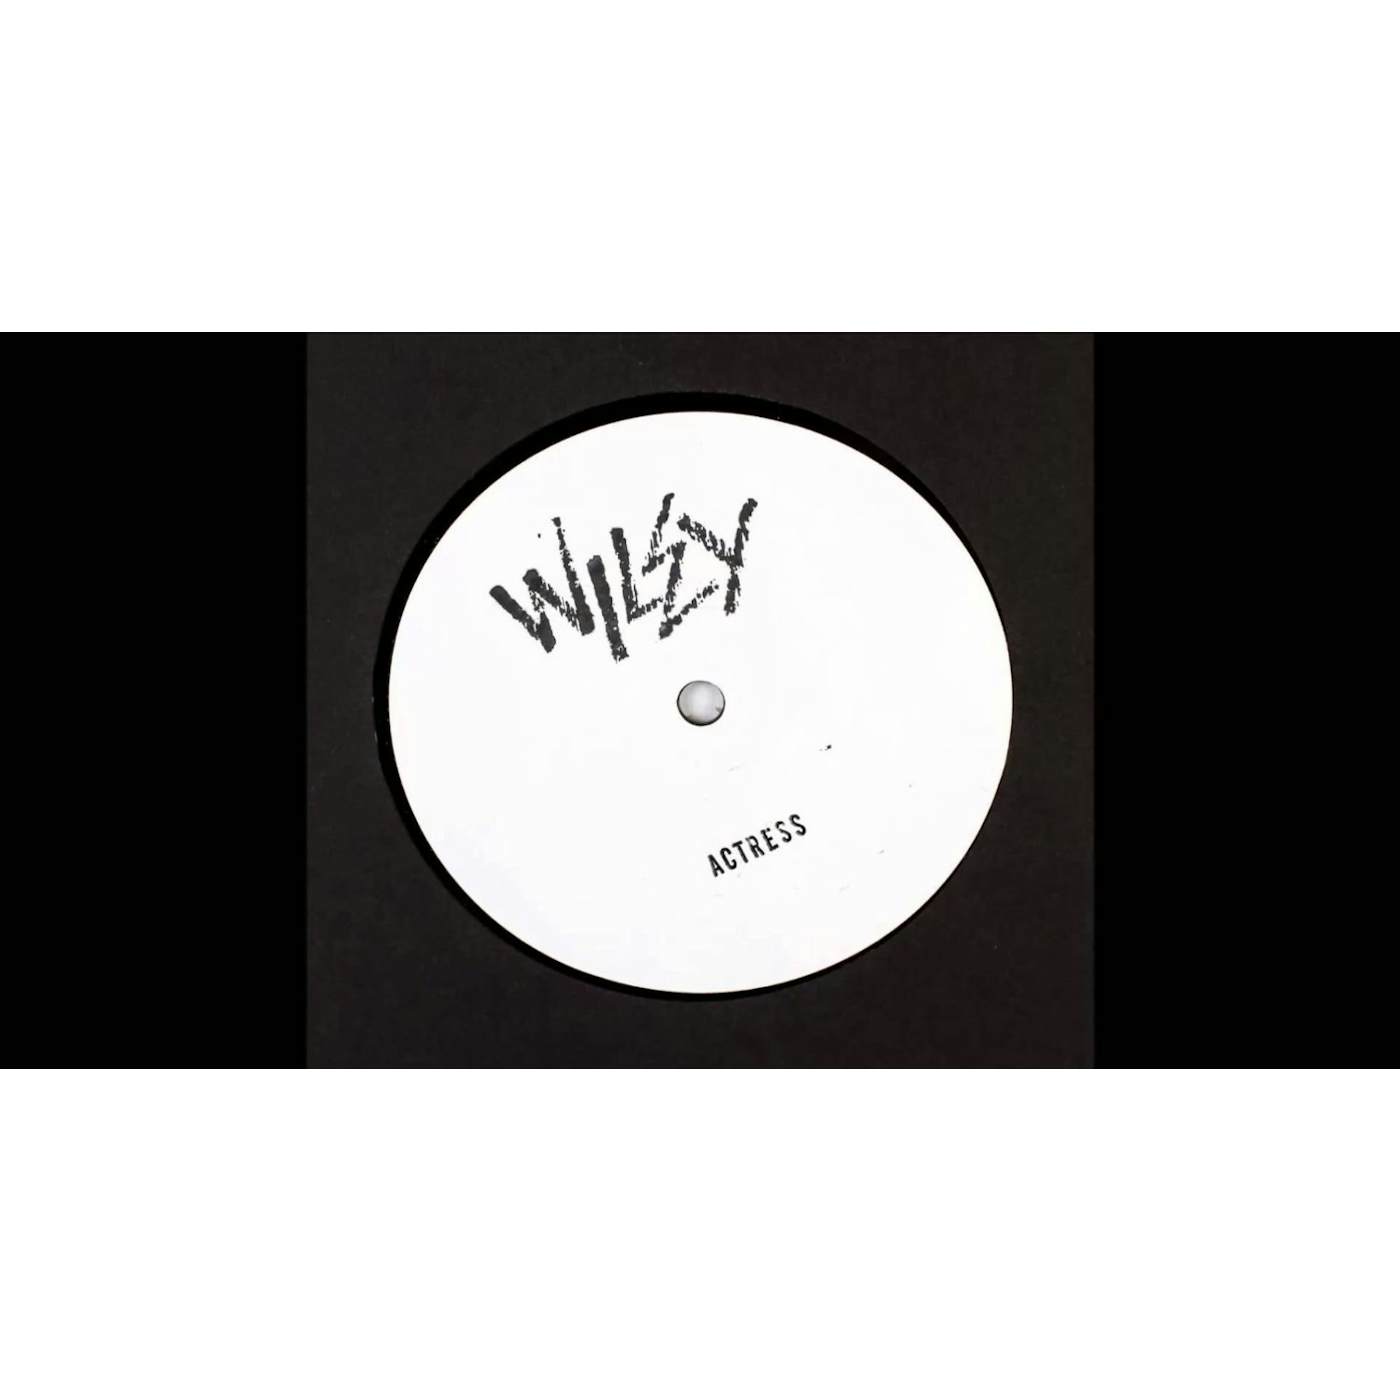 Wiley FROM THE OUTSIDE (ACTRESS' GENERATION 4 CONS. MIX) Vinyl Record